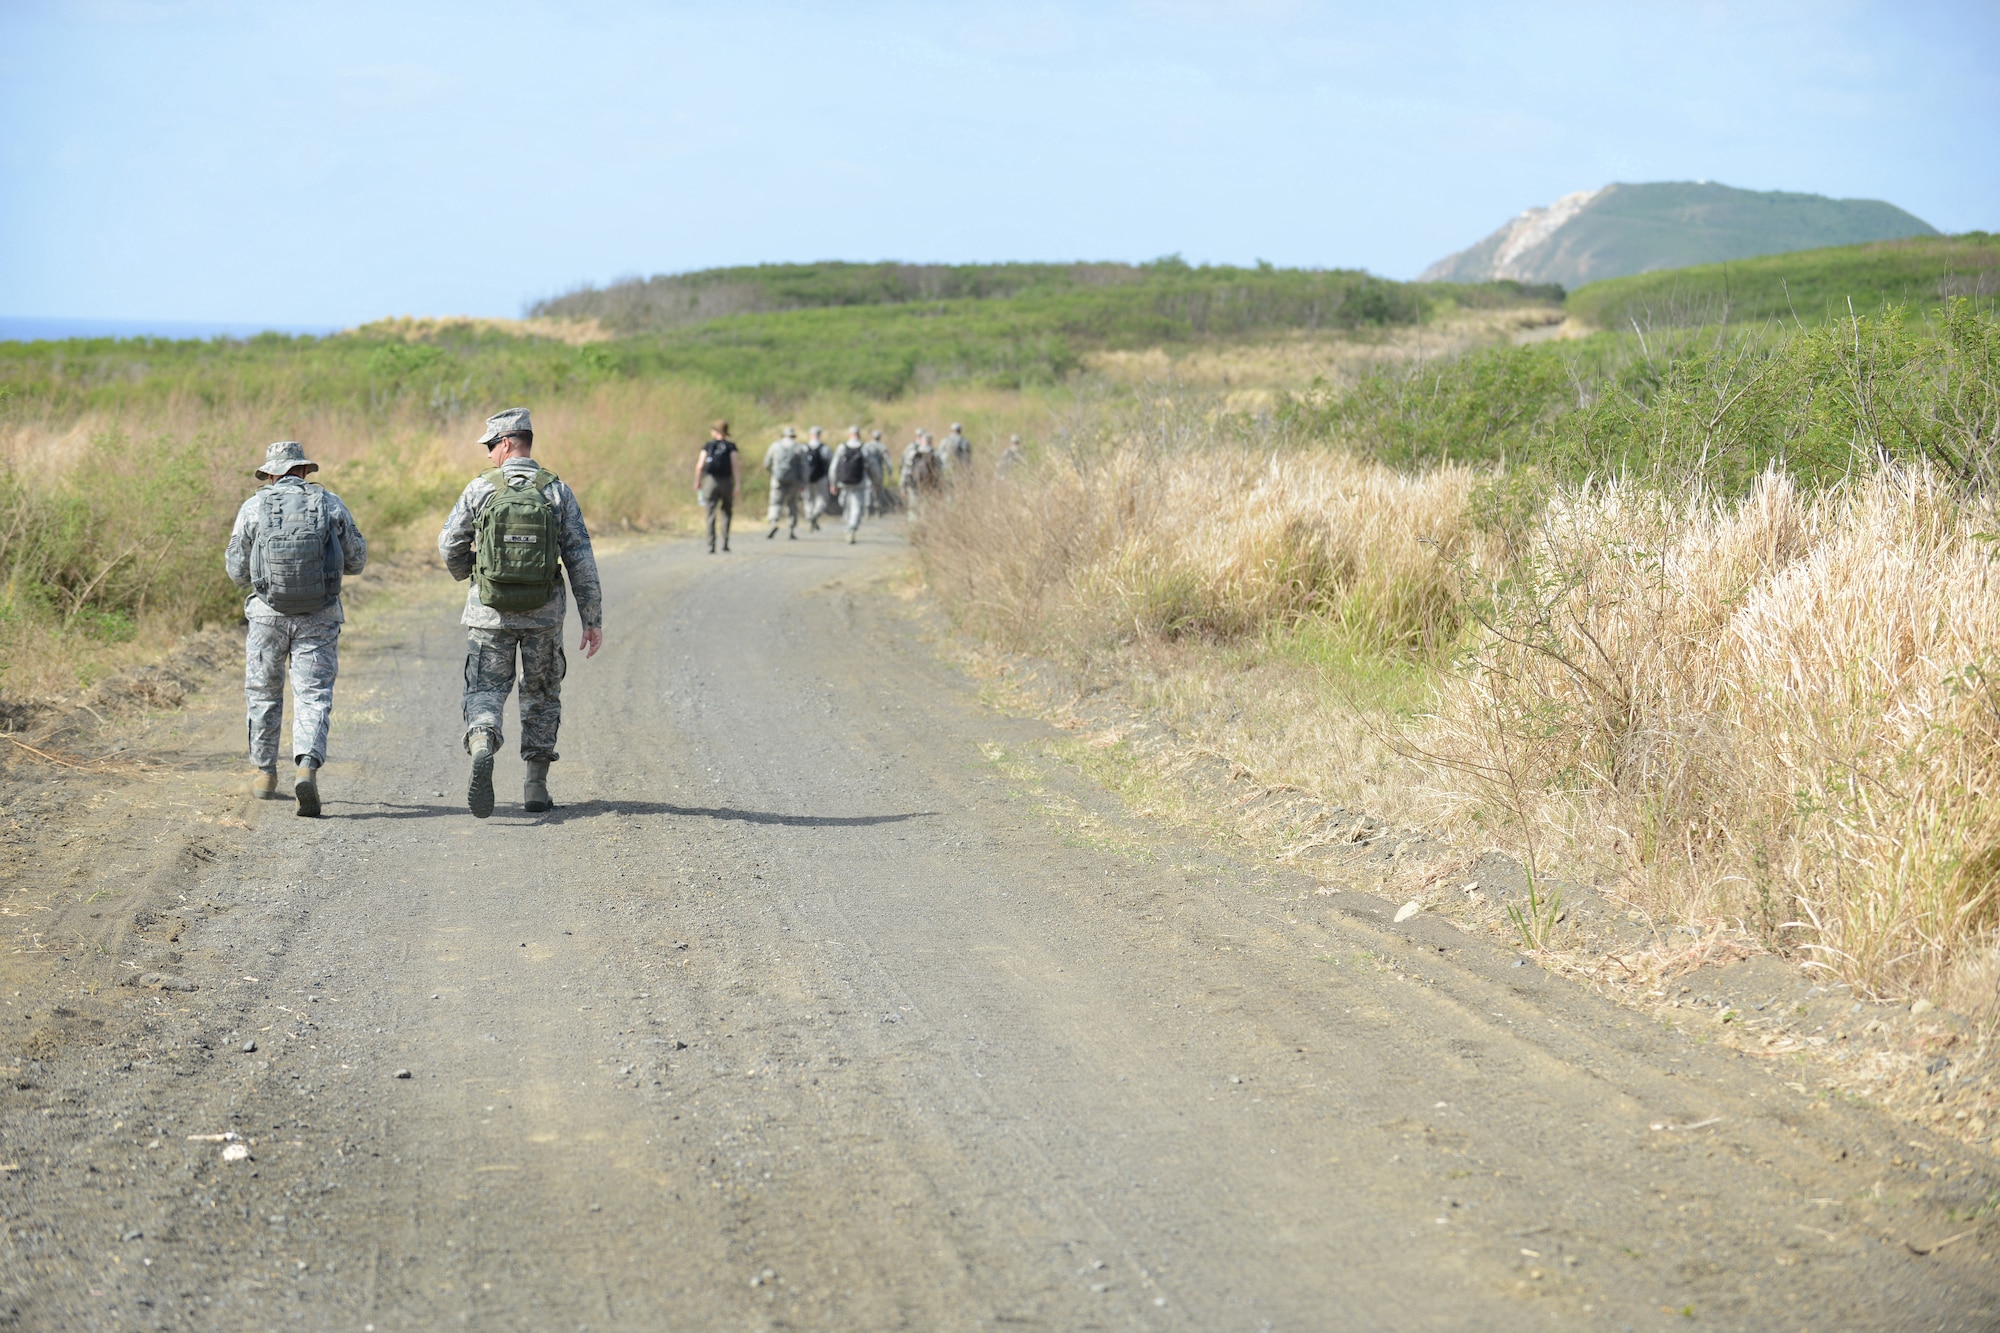 Members of the 18th Medical Group bond as they make the hike to the top of Mount Suribachi on Iwo To, Japan, formerly called Iwo Jima. About 40 Airmen from the 18th Medical Group toured the south side of the renowned island on about a 10-mile hike to and from the memorial at the top of the peak, March 18, 2013. (U.S. Air Force photo/Tech Sgt. Jocelyn L. Rich-Pendracki)